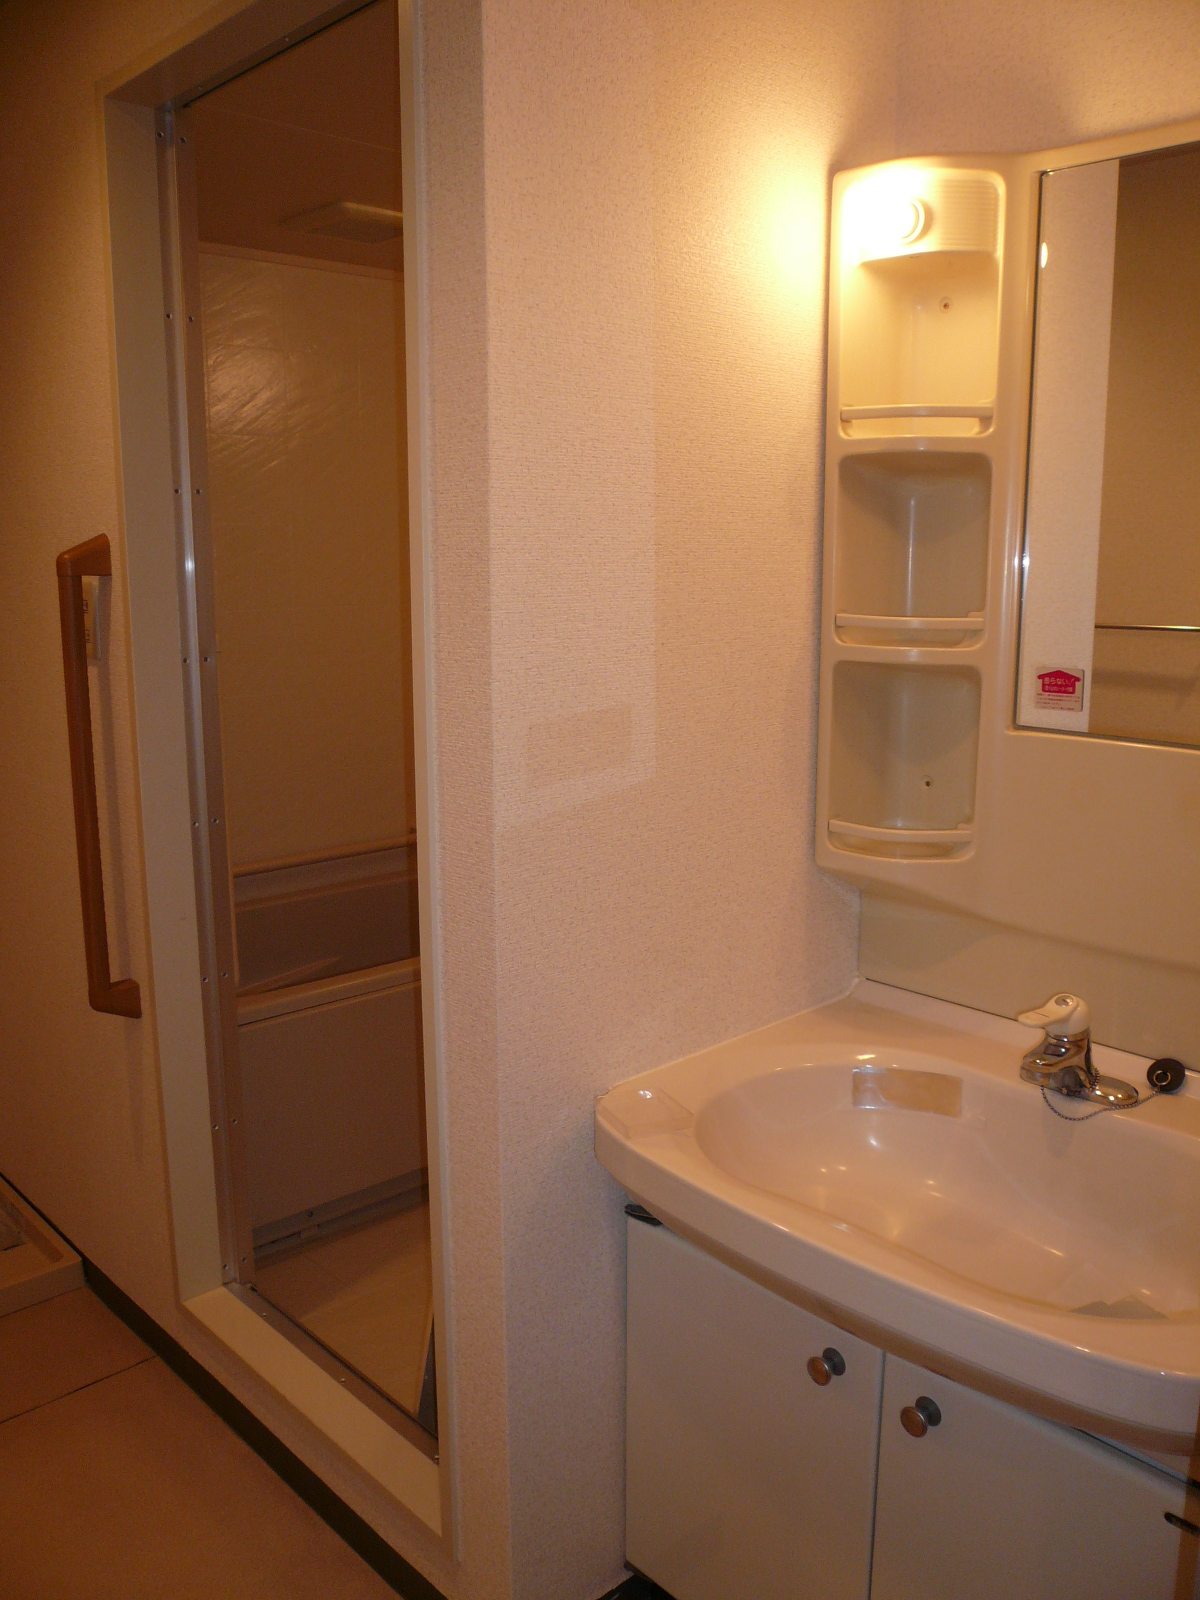 Washroom. Washroom  The same type ・ It will be in a separate dwelling unit photos.